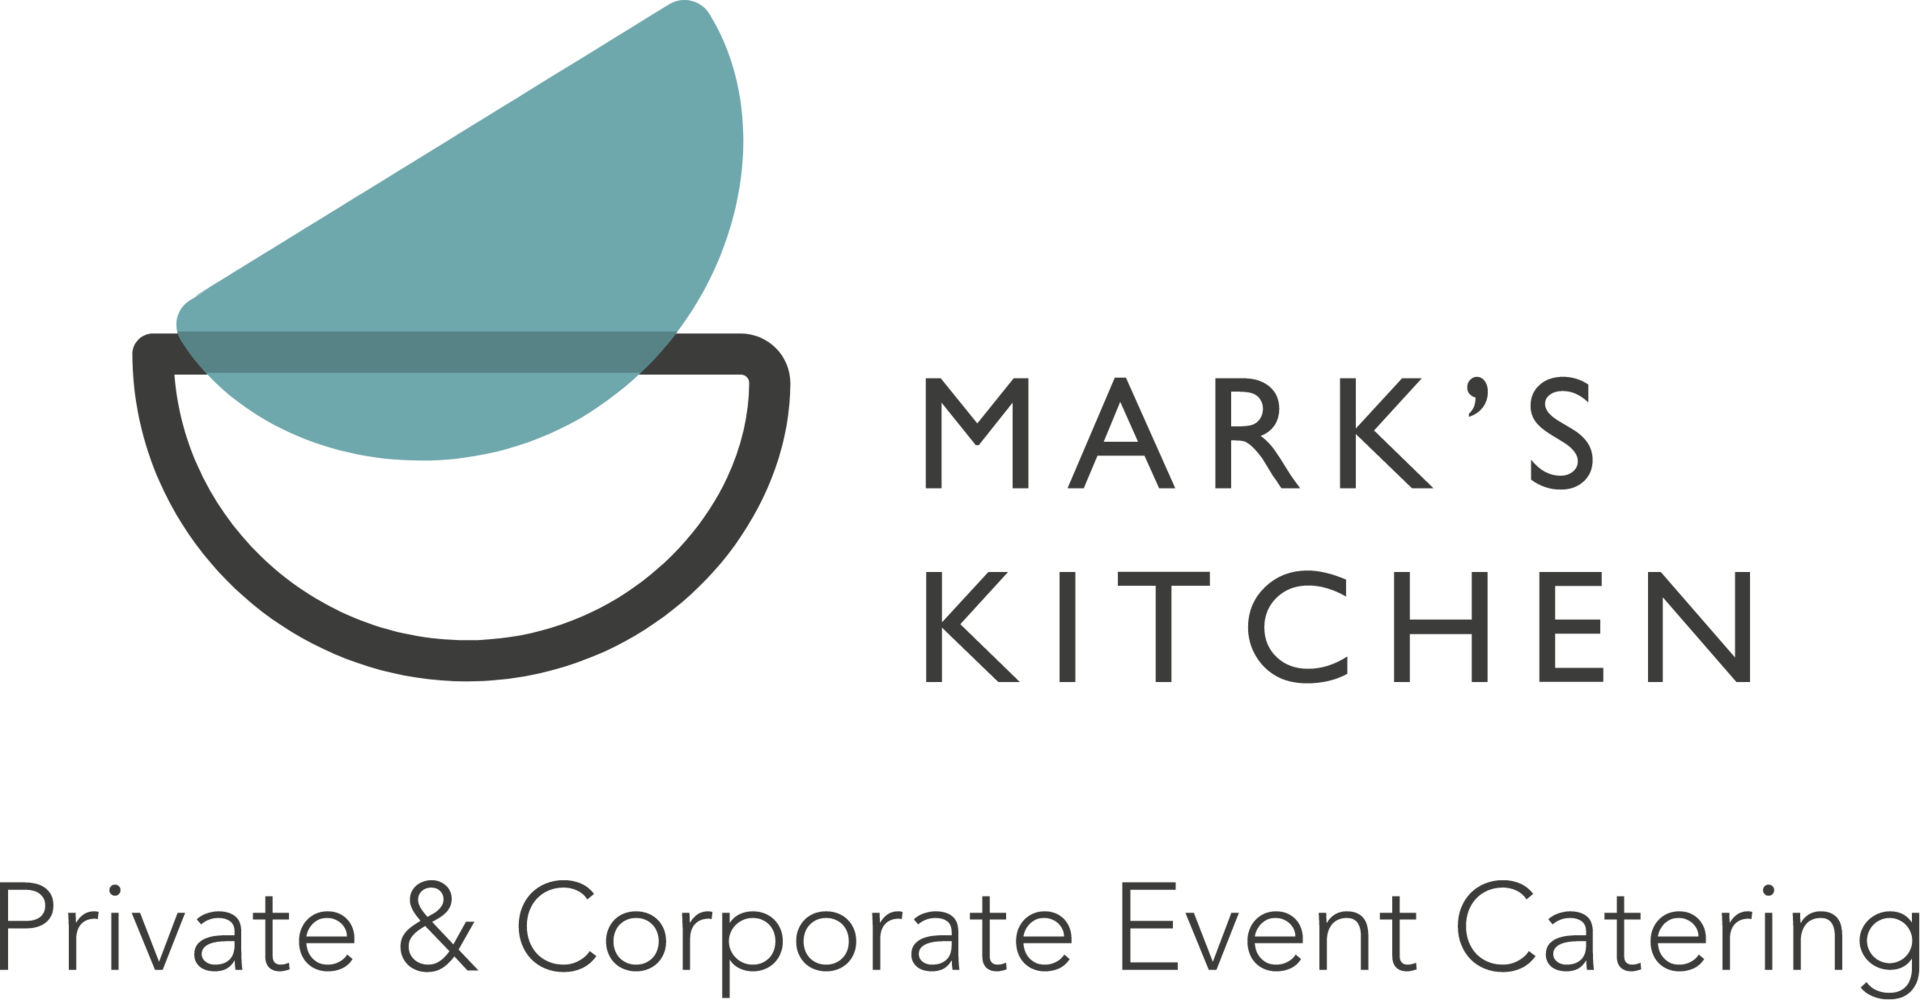 Mark's Kitchen - Event Catering in Bristol